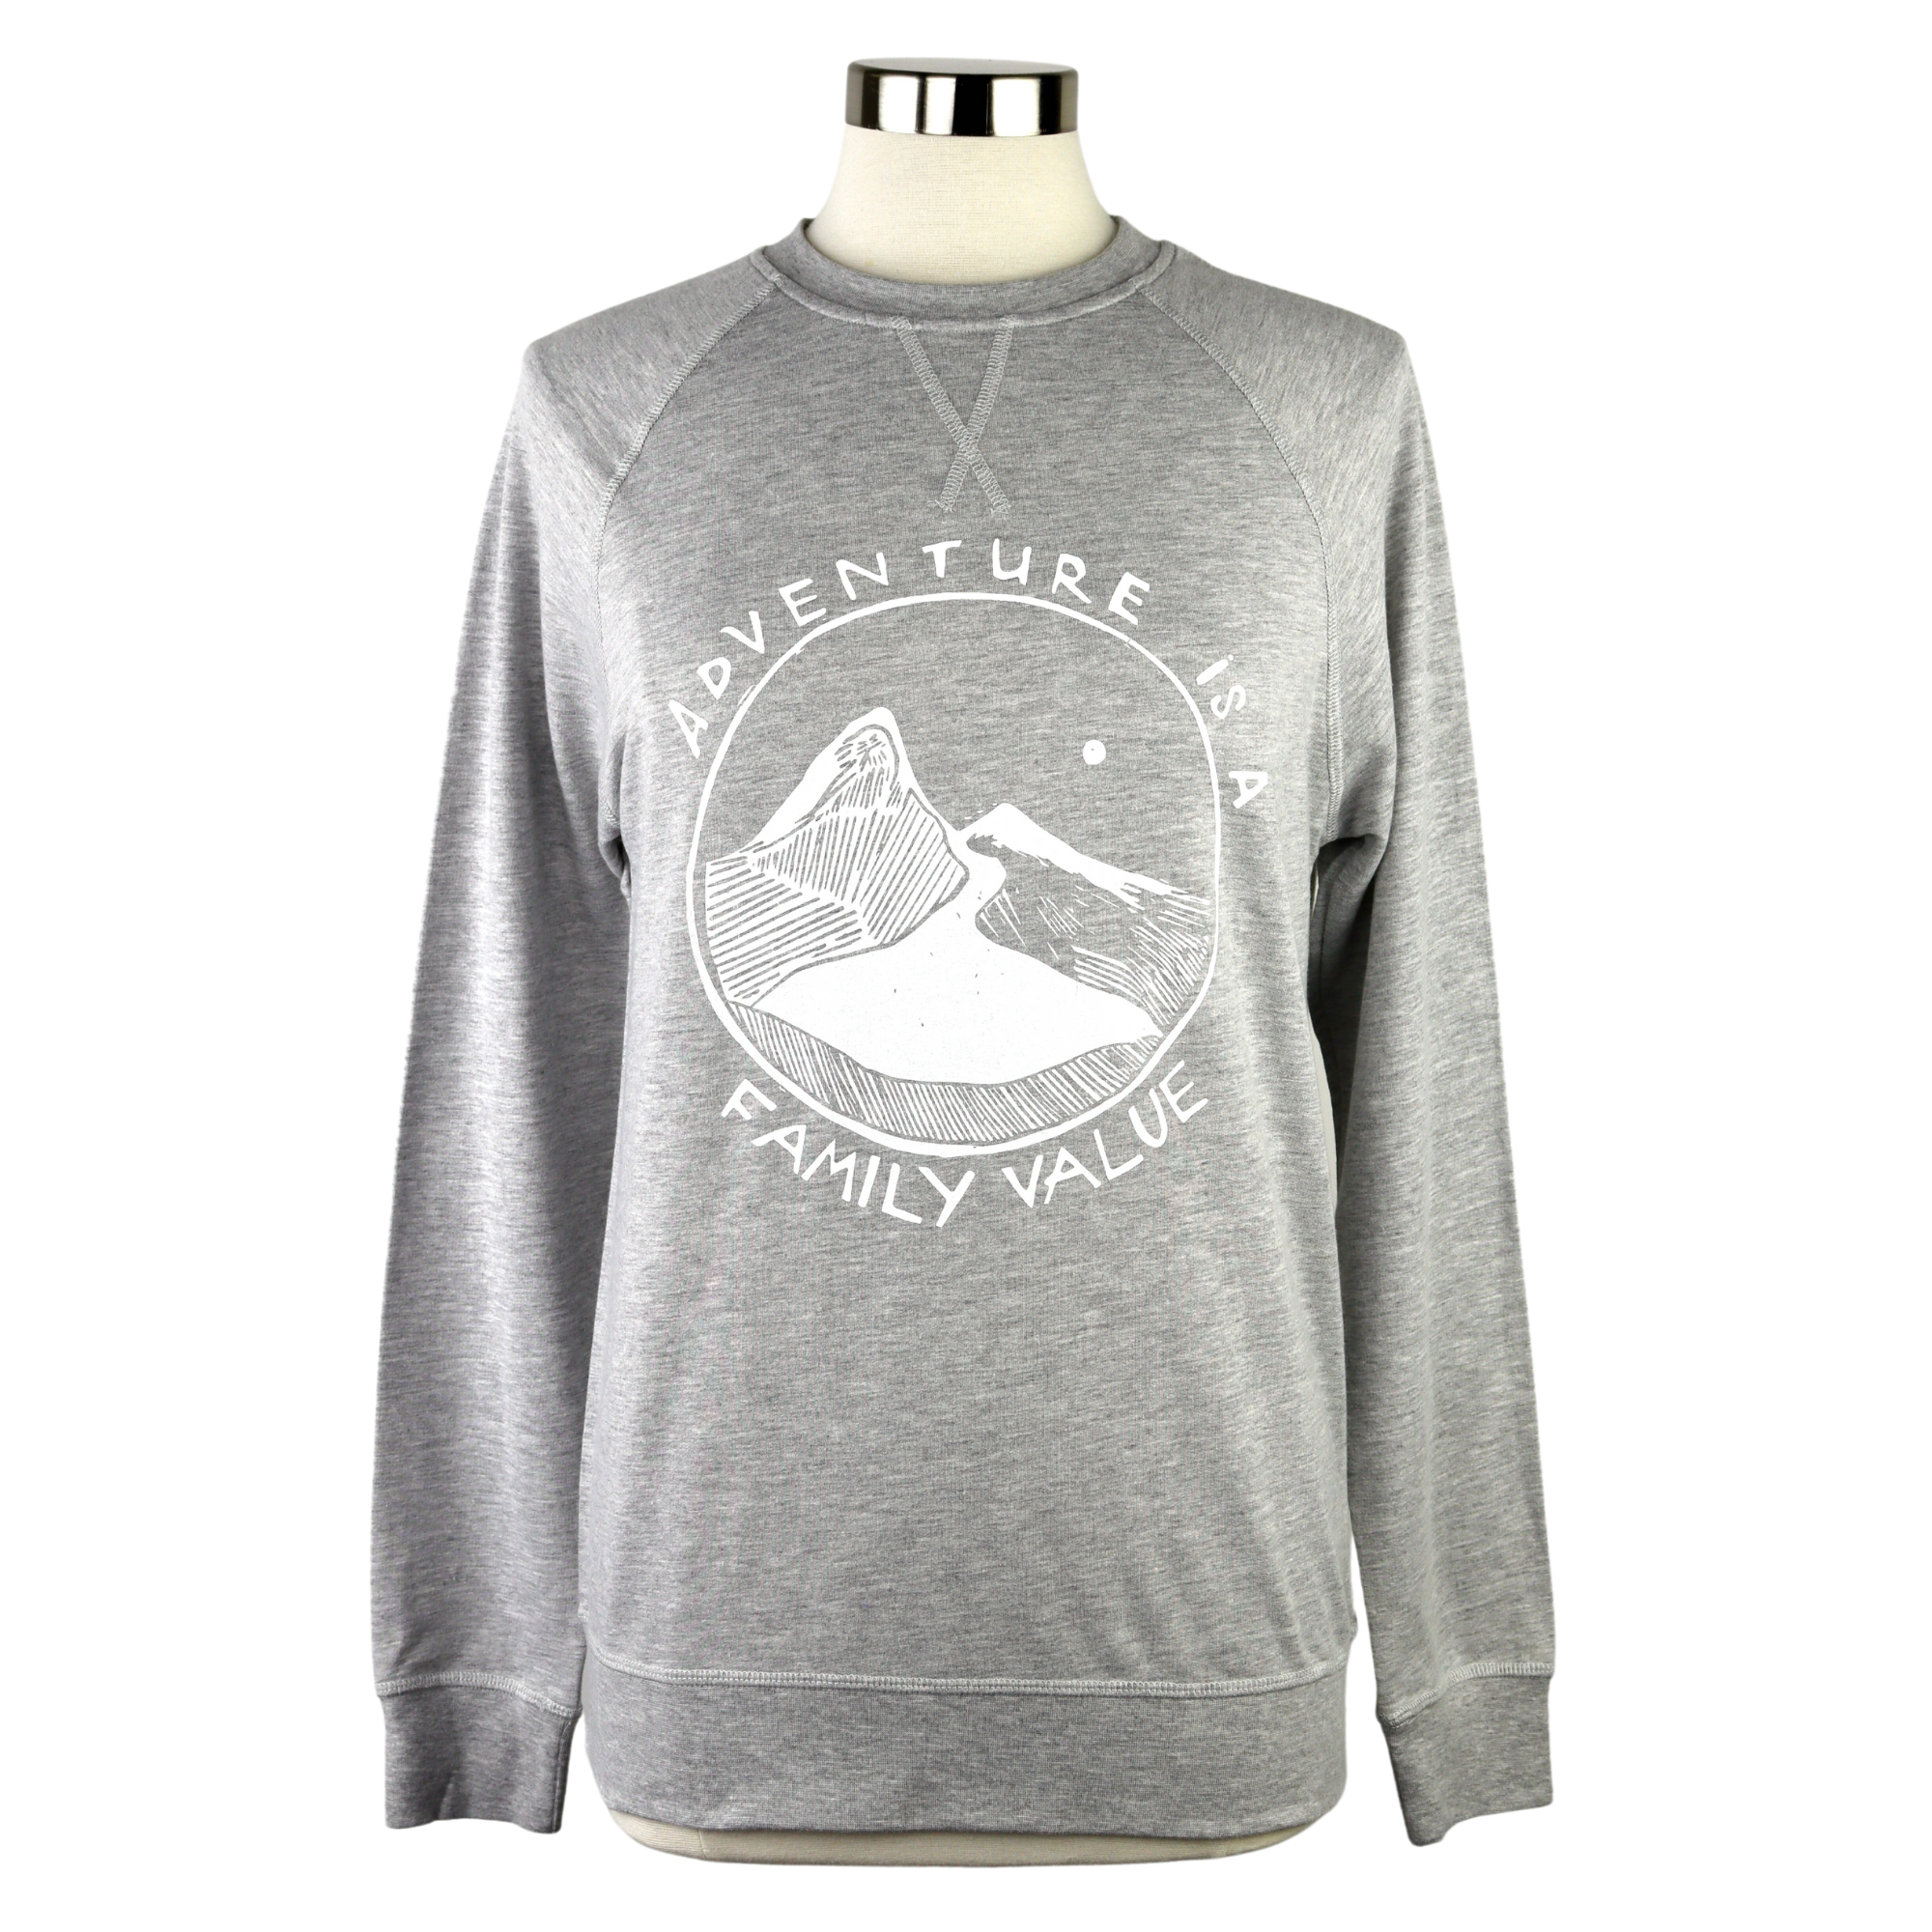 Adventure is a Family Value Unisex French Terry Crewneck in Heather Grey